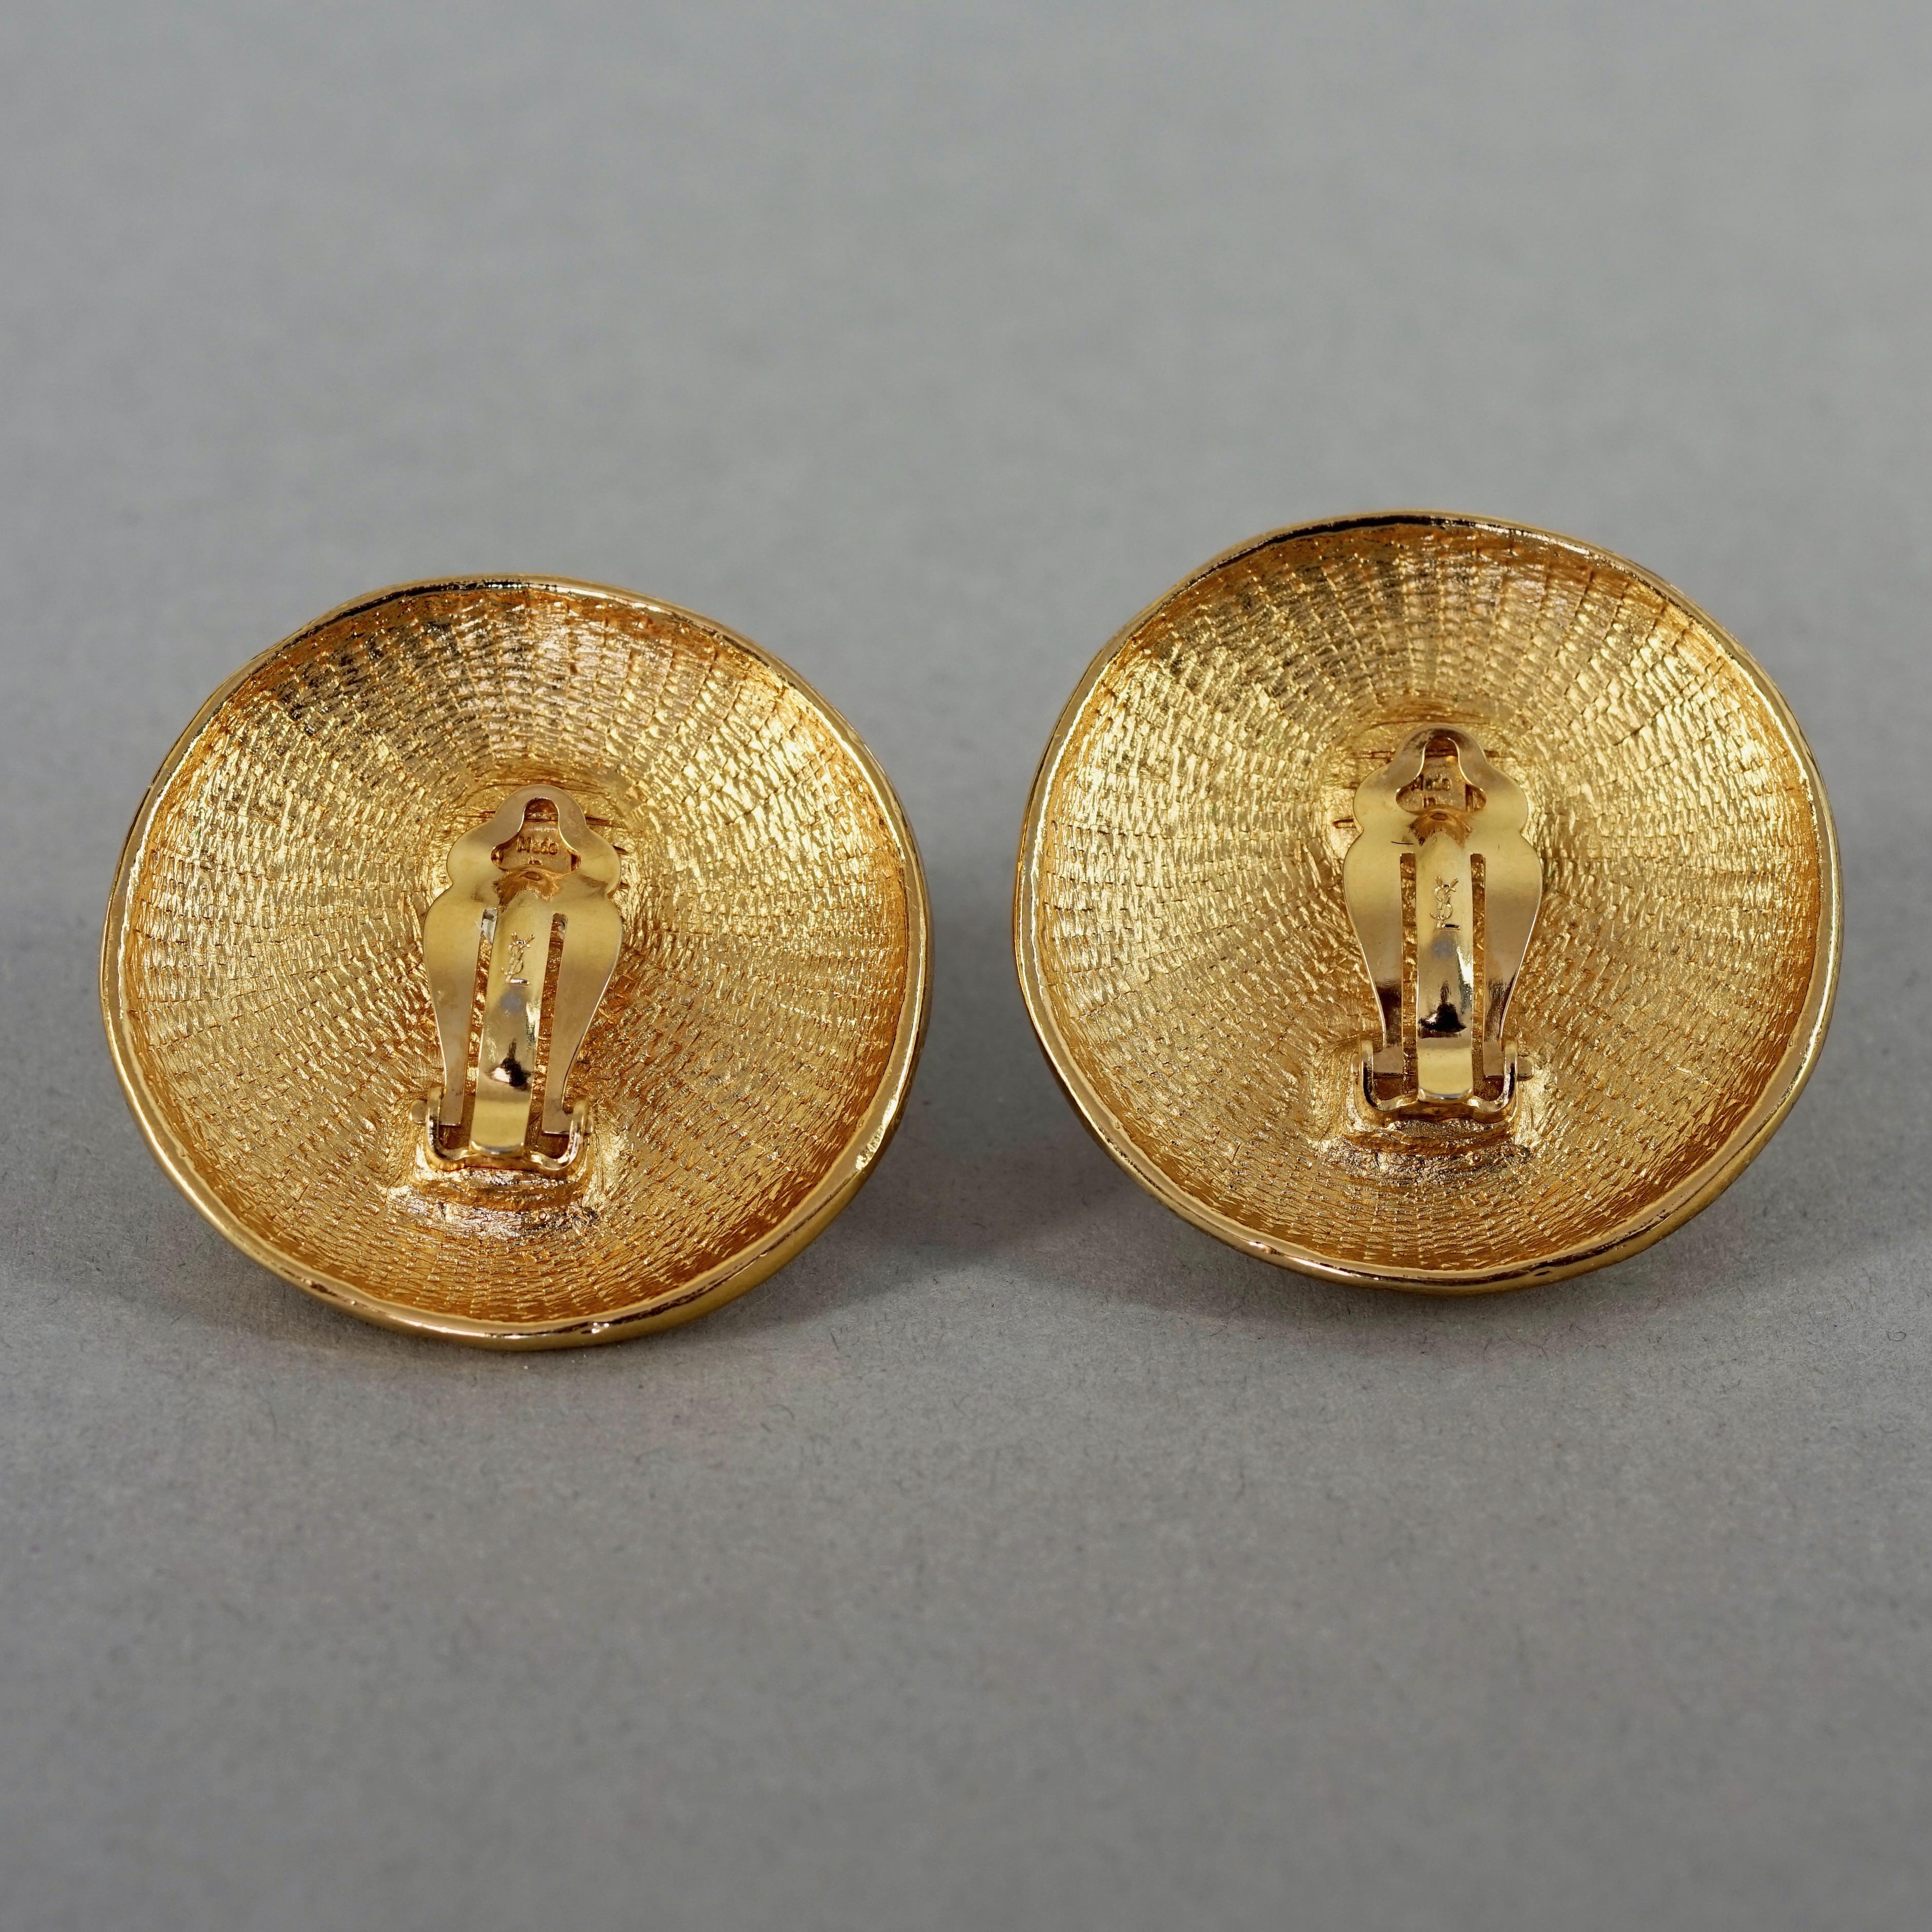 Vintage YVES SAINT LAURENT Ysl Textured Gold Round Earrings For Sale 5